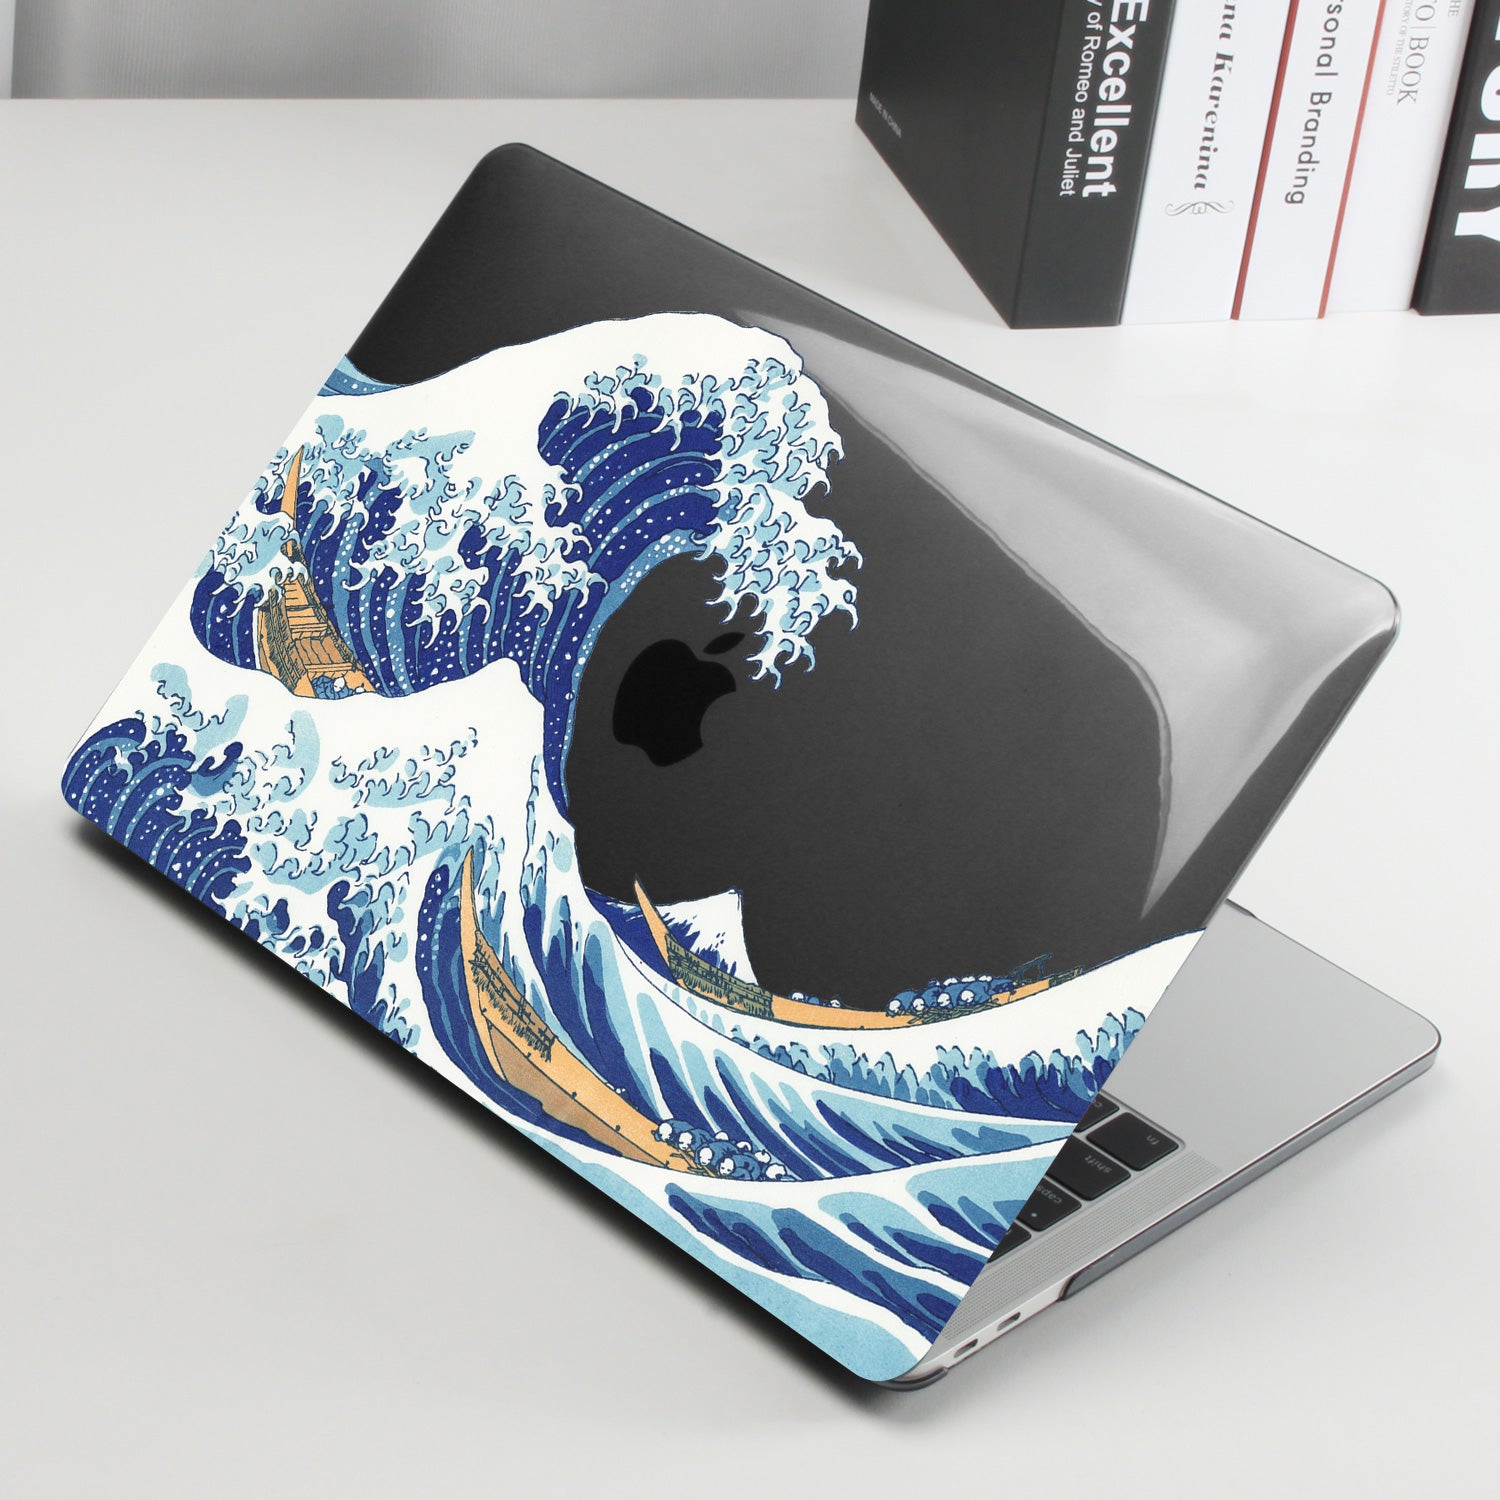 Sailing on the waves Macbook case